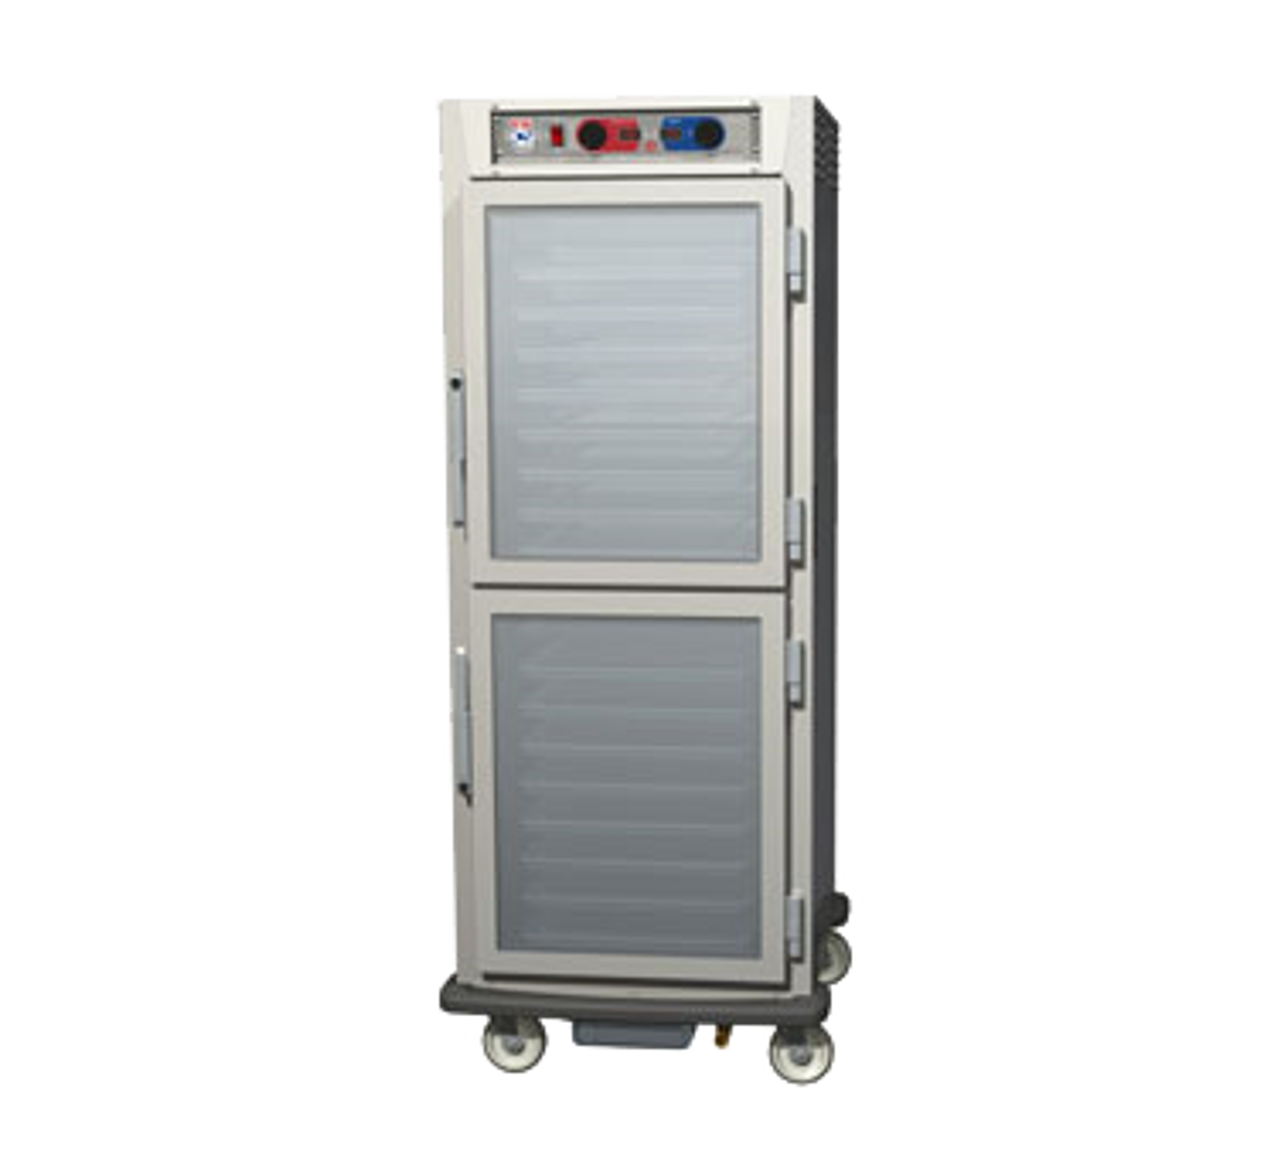 C5™ 9 Series Controlled Humidity Heated Holding & Proofing Cabinet, mobile, full height, clear double panel tempered glass Dutch doors, universal wire slides, capacity (17) 18" x 26" or (34) 12" x 20" x 2-1/2" pans, 3" OC (adjustable on 1-1/2" increments), stainless steel, 5" casters, polymer bumper & drip trough combination, 120v/60/1-PH, 2000 watts, 16 amps, NEMA 5-20P, cULus, NSF